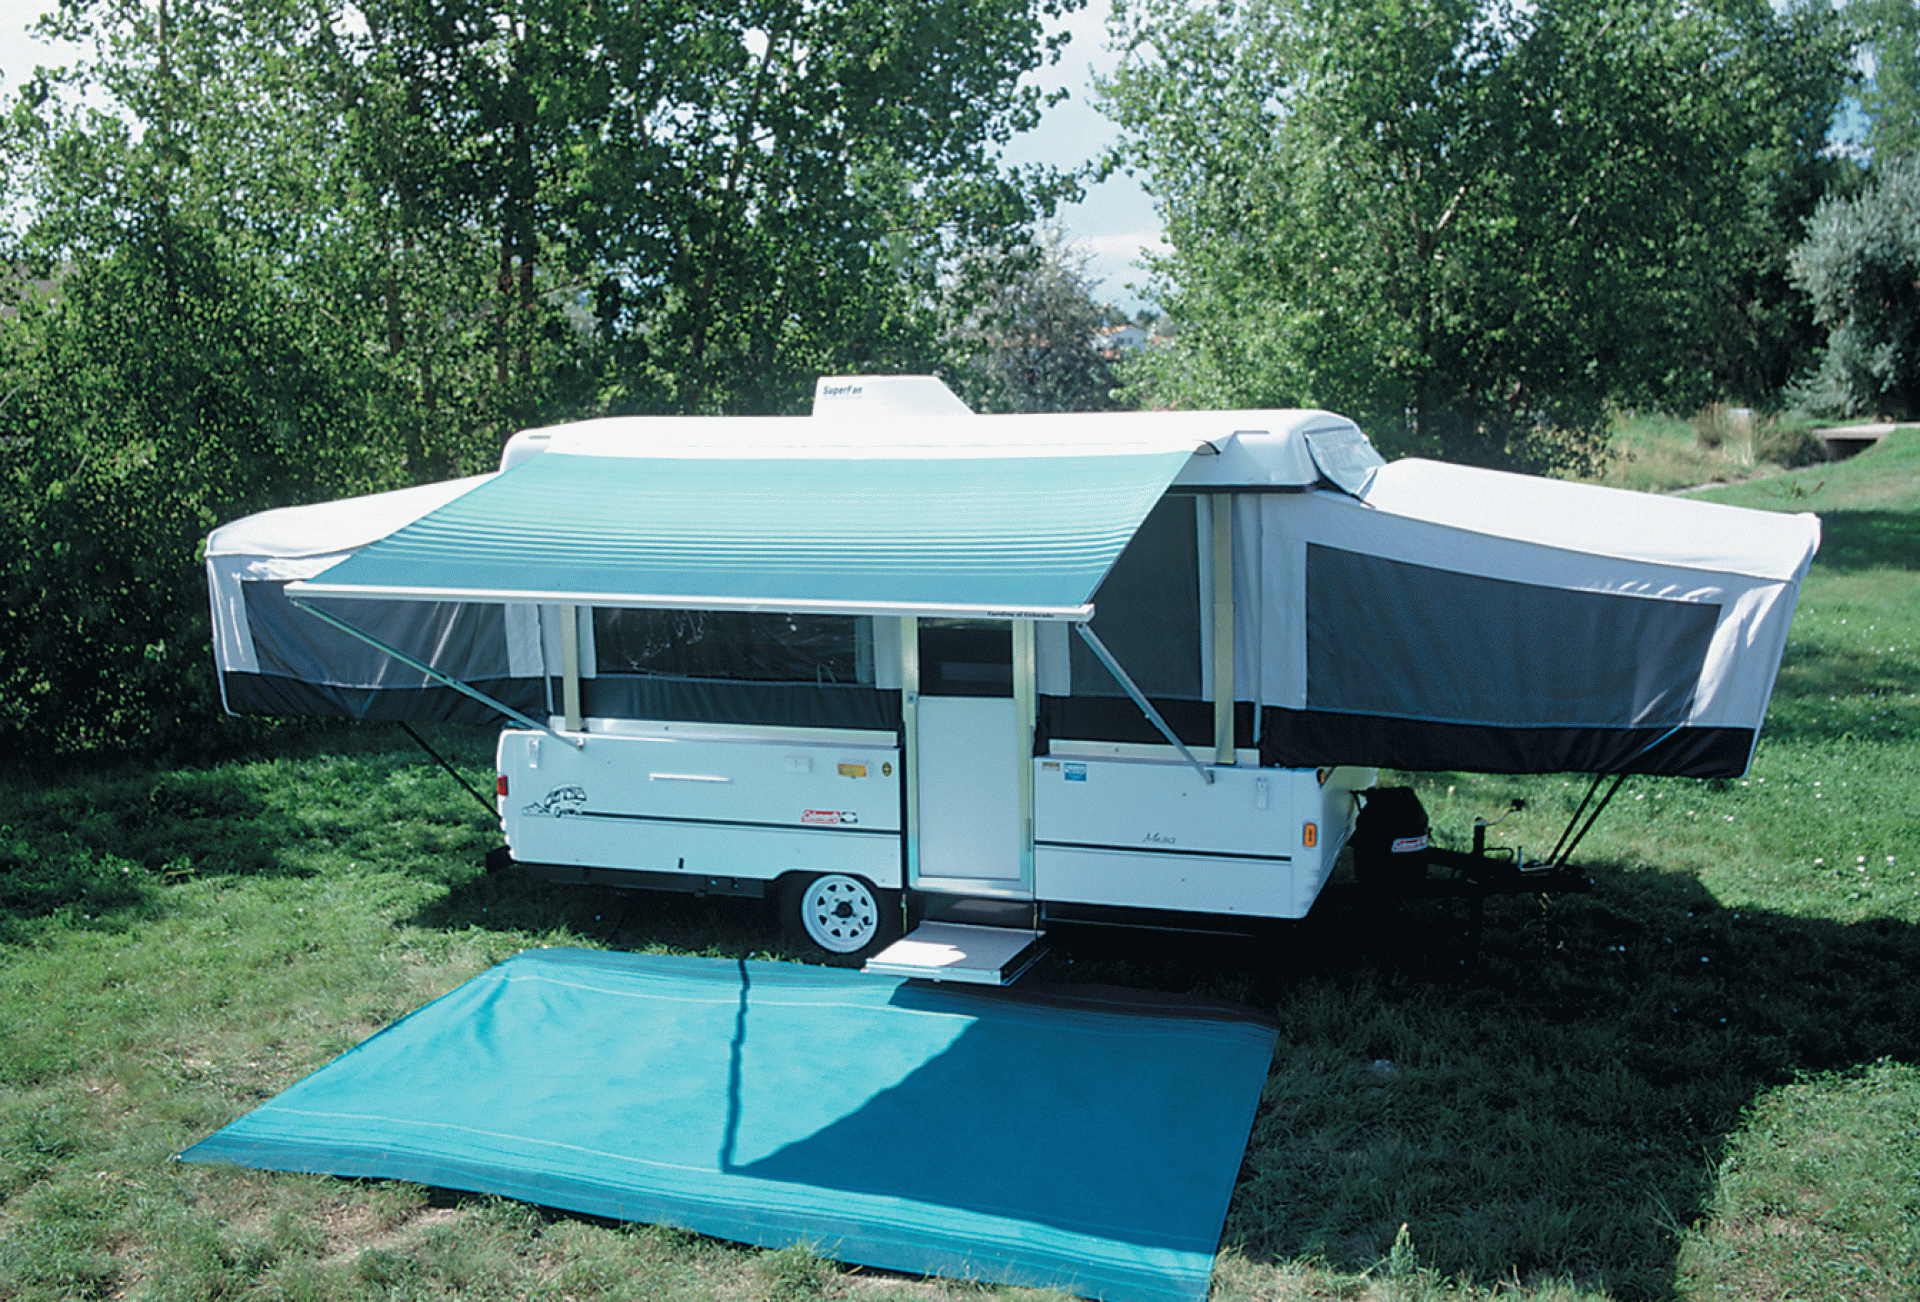 CAREFREE OF COLORADO | 981188A00 | Campout Awning Metric 3.0 Metric 9' 10" Sierra Brown Dune Stripe with White Bag